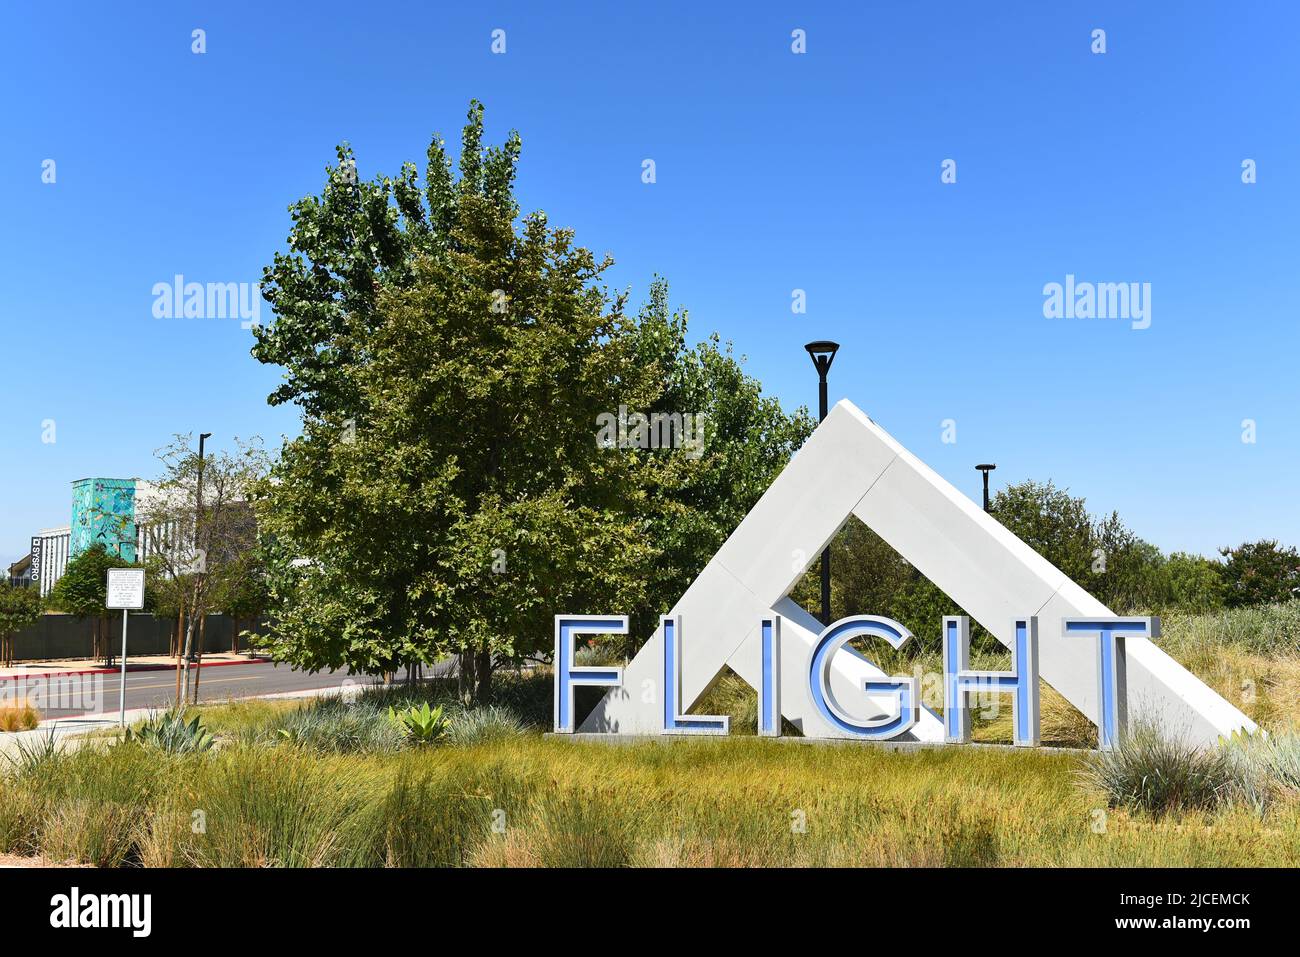 TUSTIN, CALIFORNIA - 12 JUN 2022: Flight sign at the east entrance to the Business Park at Tustin Legacy. Stock Photo